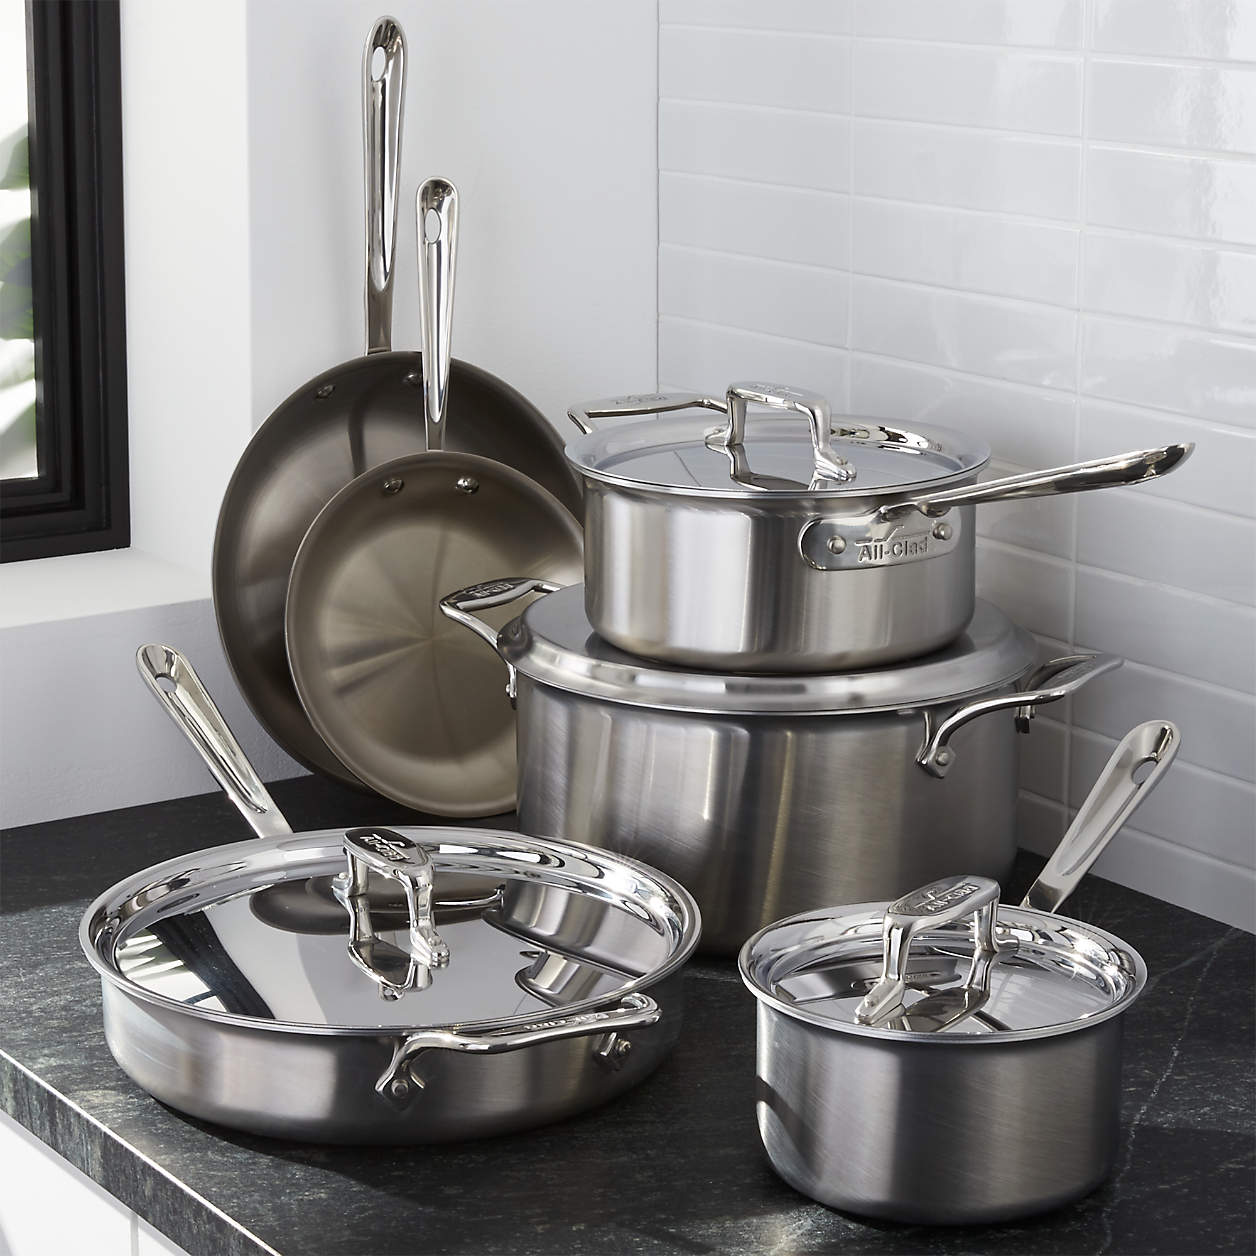 All-Clad d5 Brushed Stainless Steel 10-Piece Cookware Set with Bonus D5 Brushed Stainless Steel 10 Pc Cookware Set